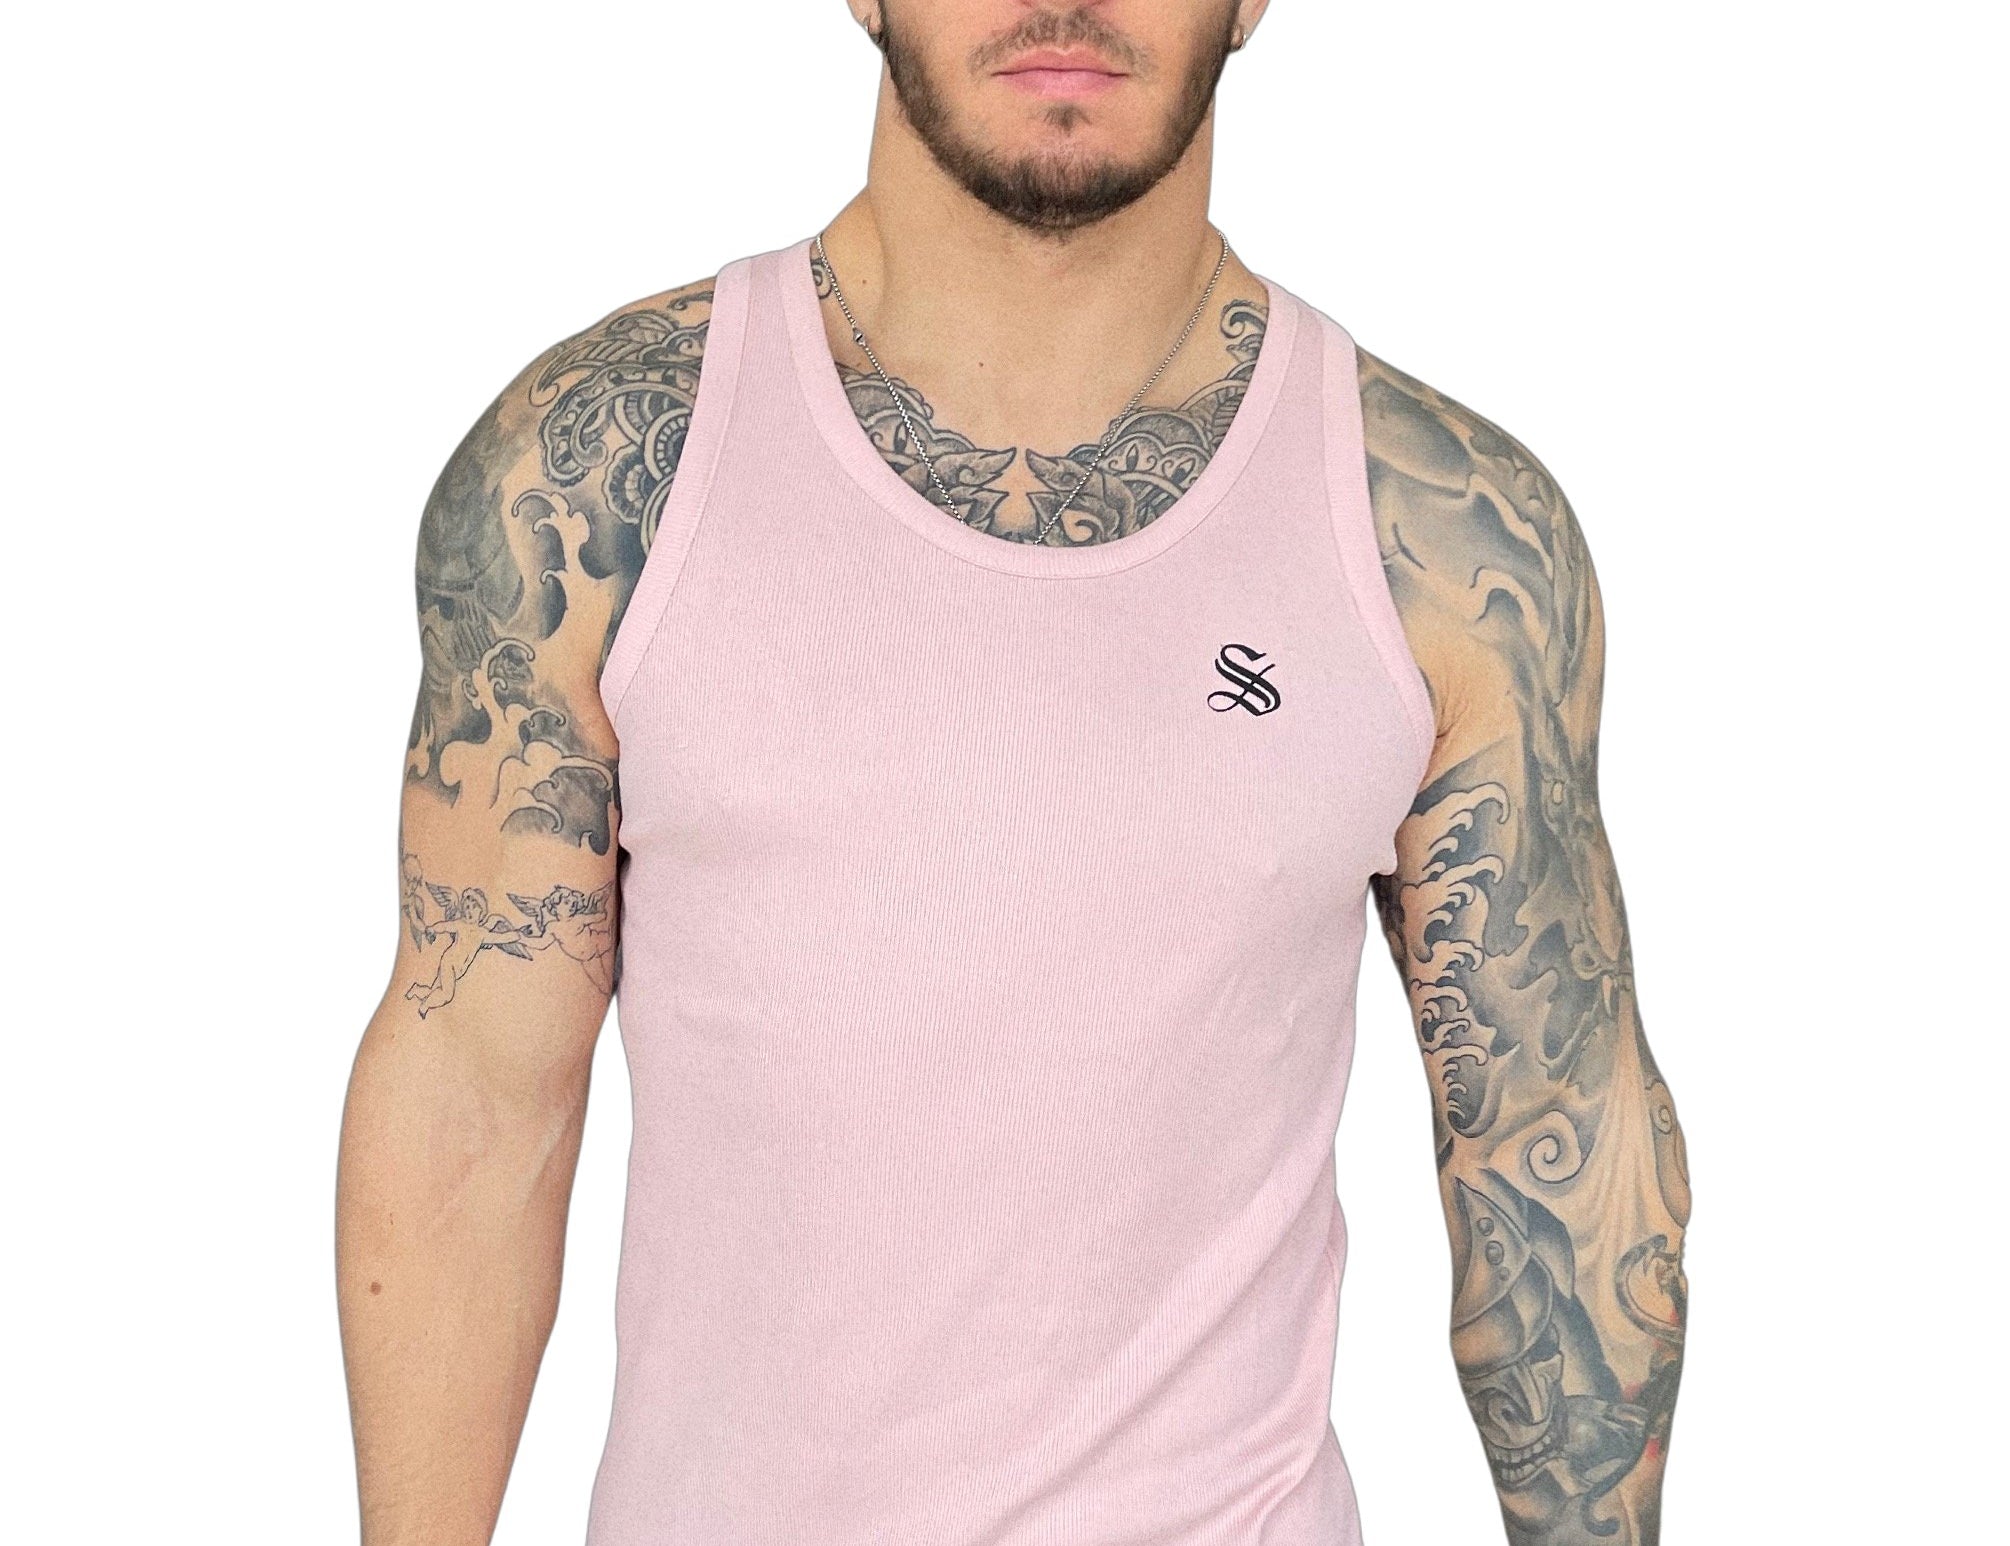 Uriel - Light Pink Tank Top for Men - Sarman Fashion - Wholesale Clothing Fashion Brand for Men from Canada